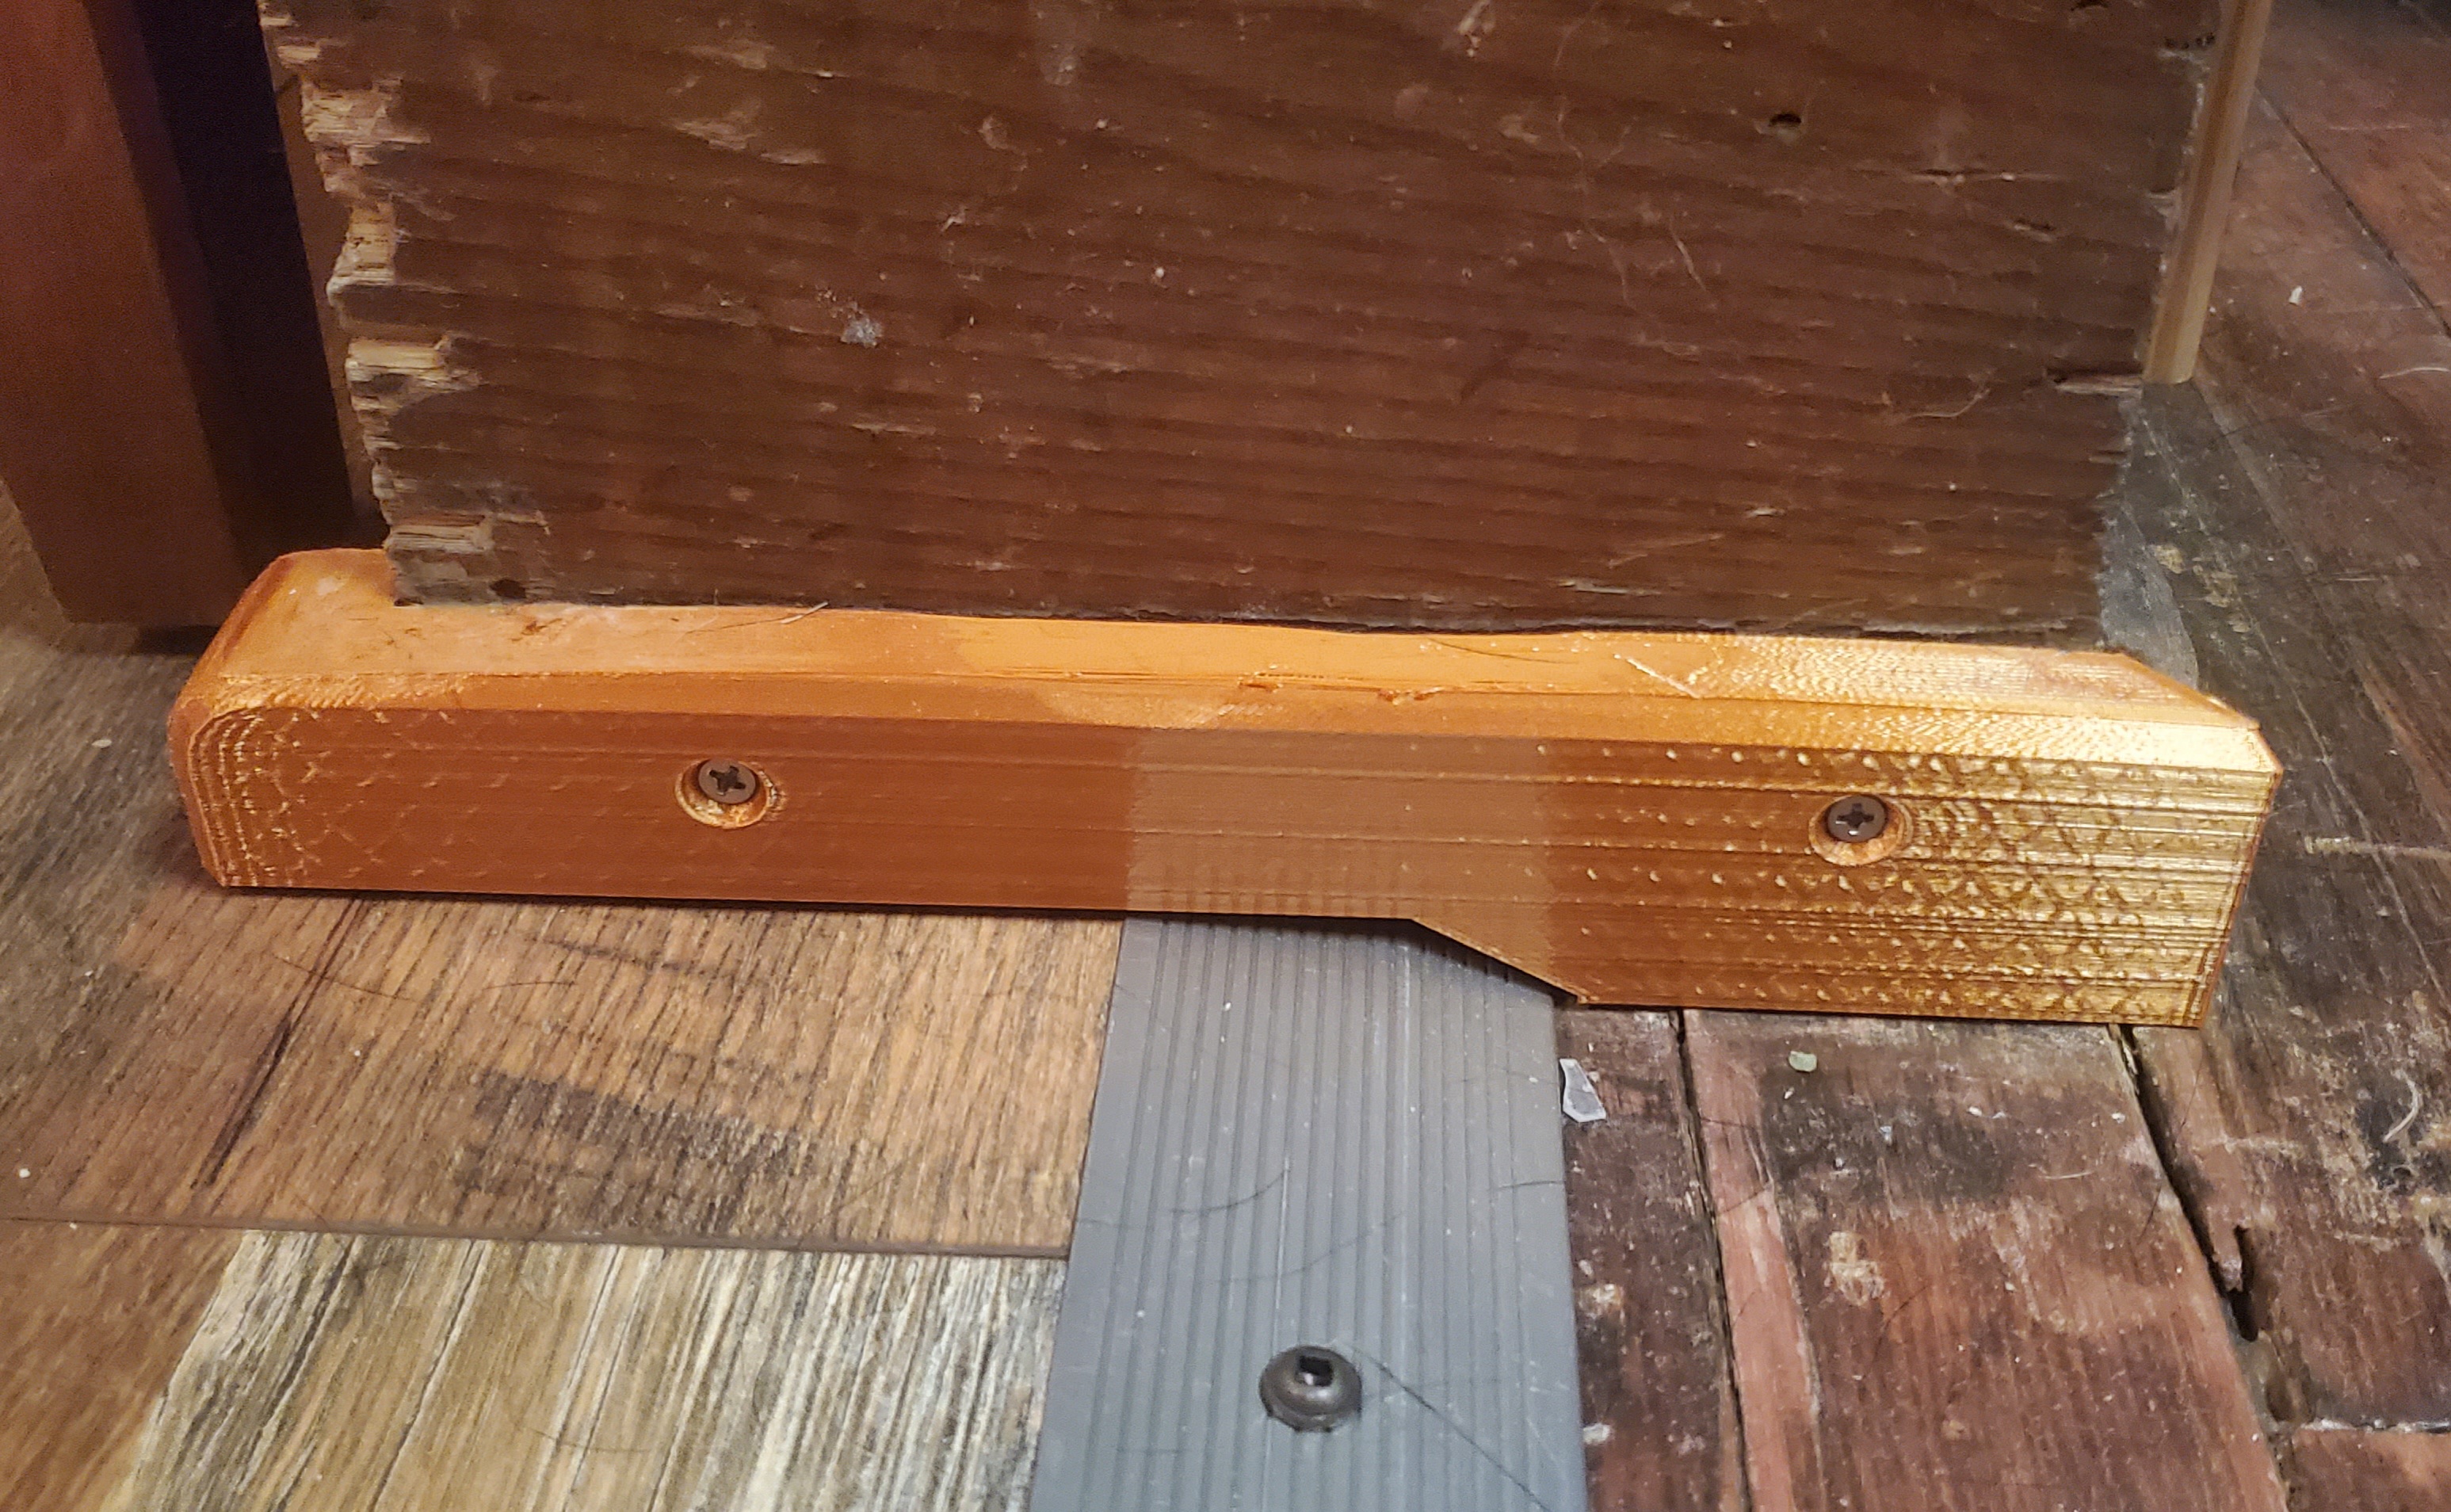 A 3D printed border for a piece of woodwork between uneven sections of flooring.